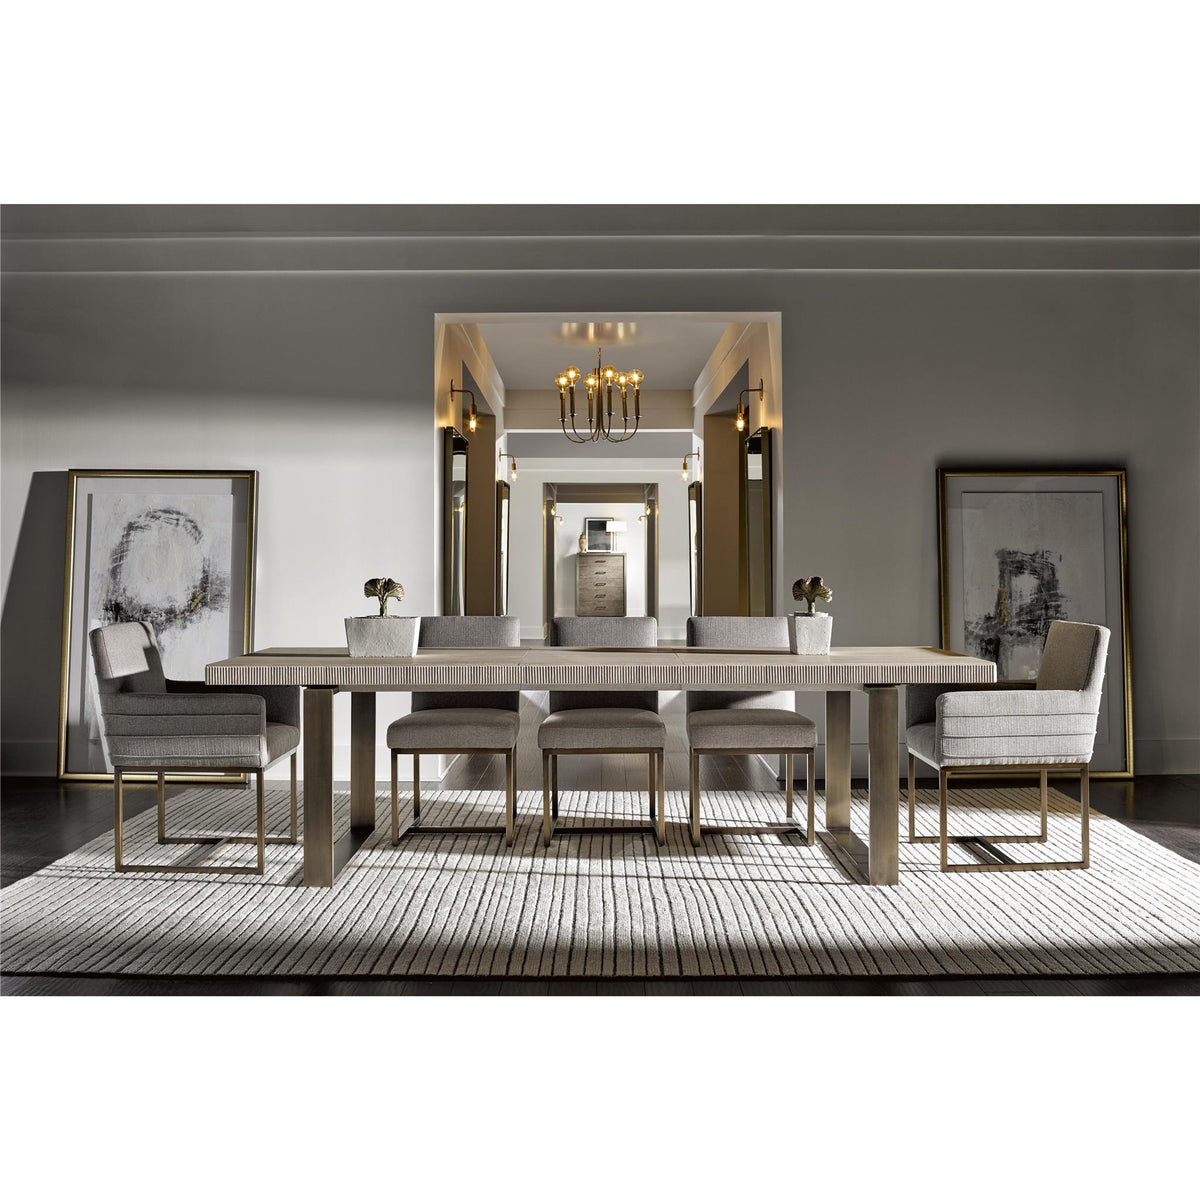 Robards Rectangular Dining Table - Be Bold Furniture